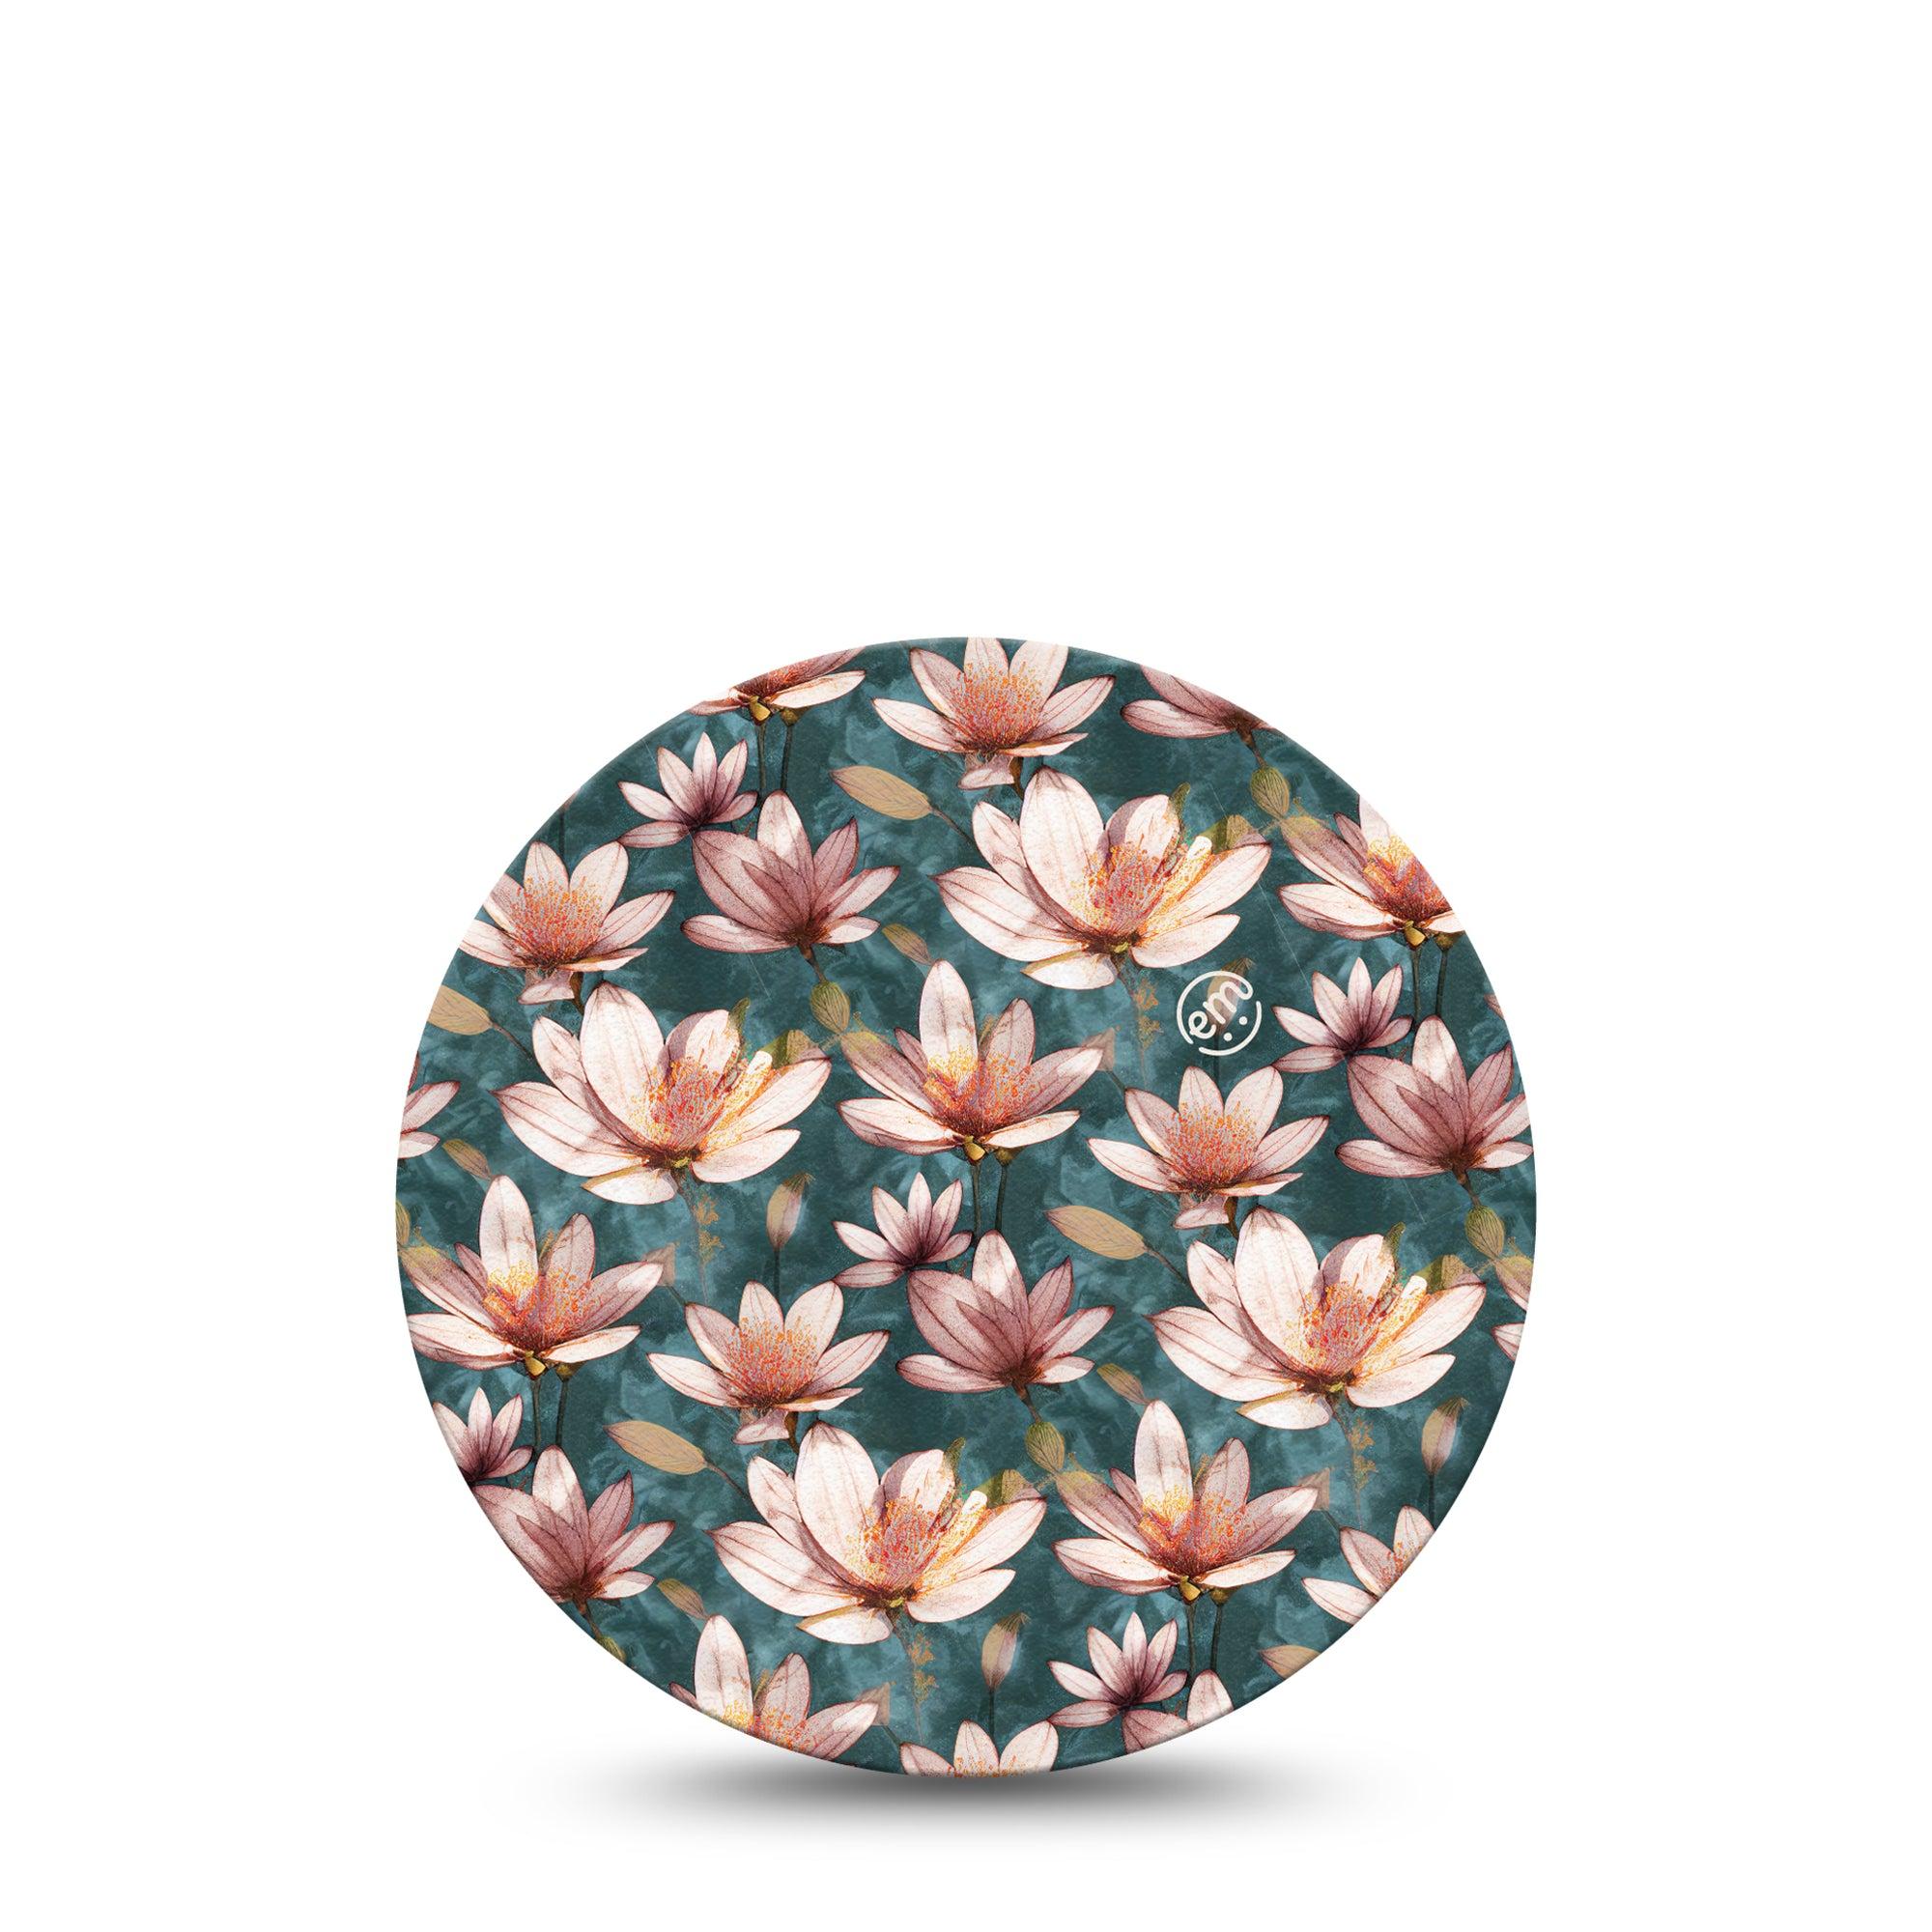 ExpressionMed Magnolia Libre 2 Overpatch, Single, Springtime Florals Themed, CGM Adhesive Tape Design